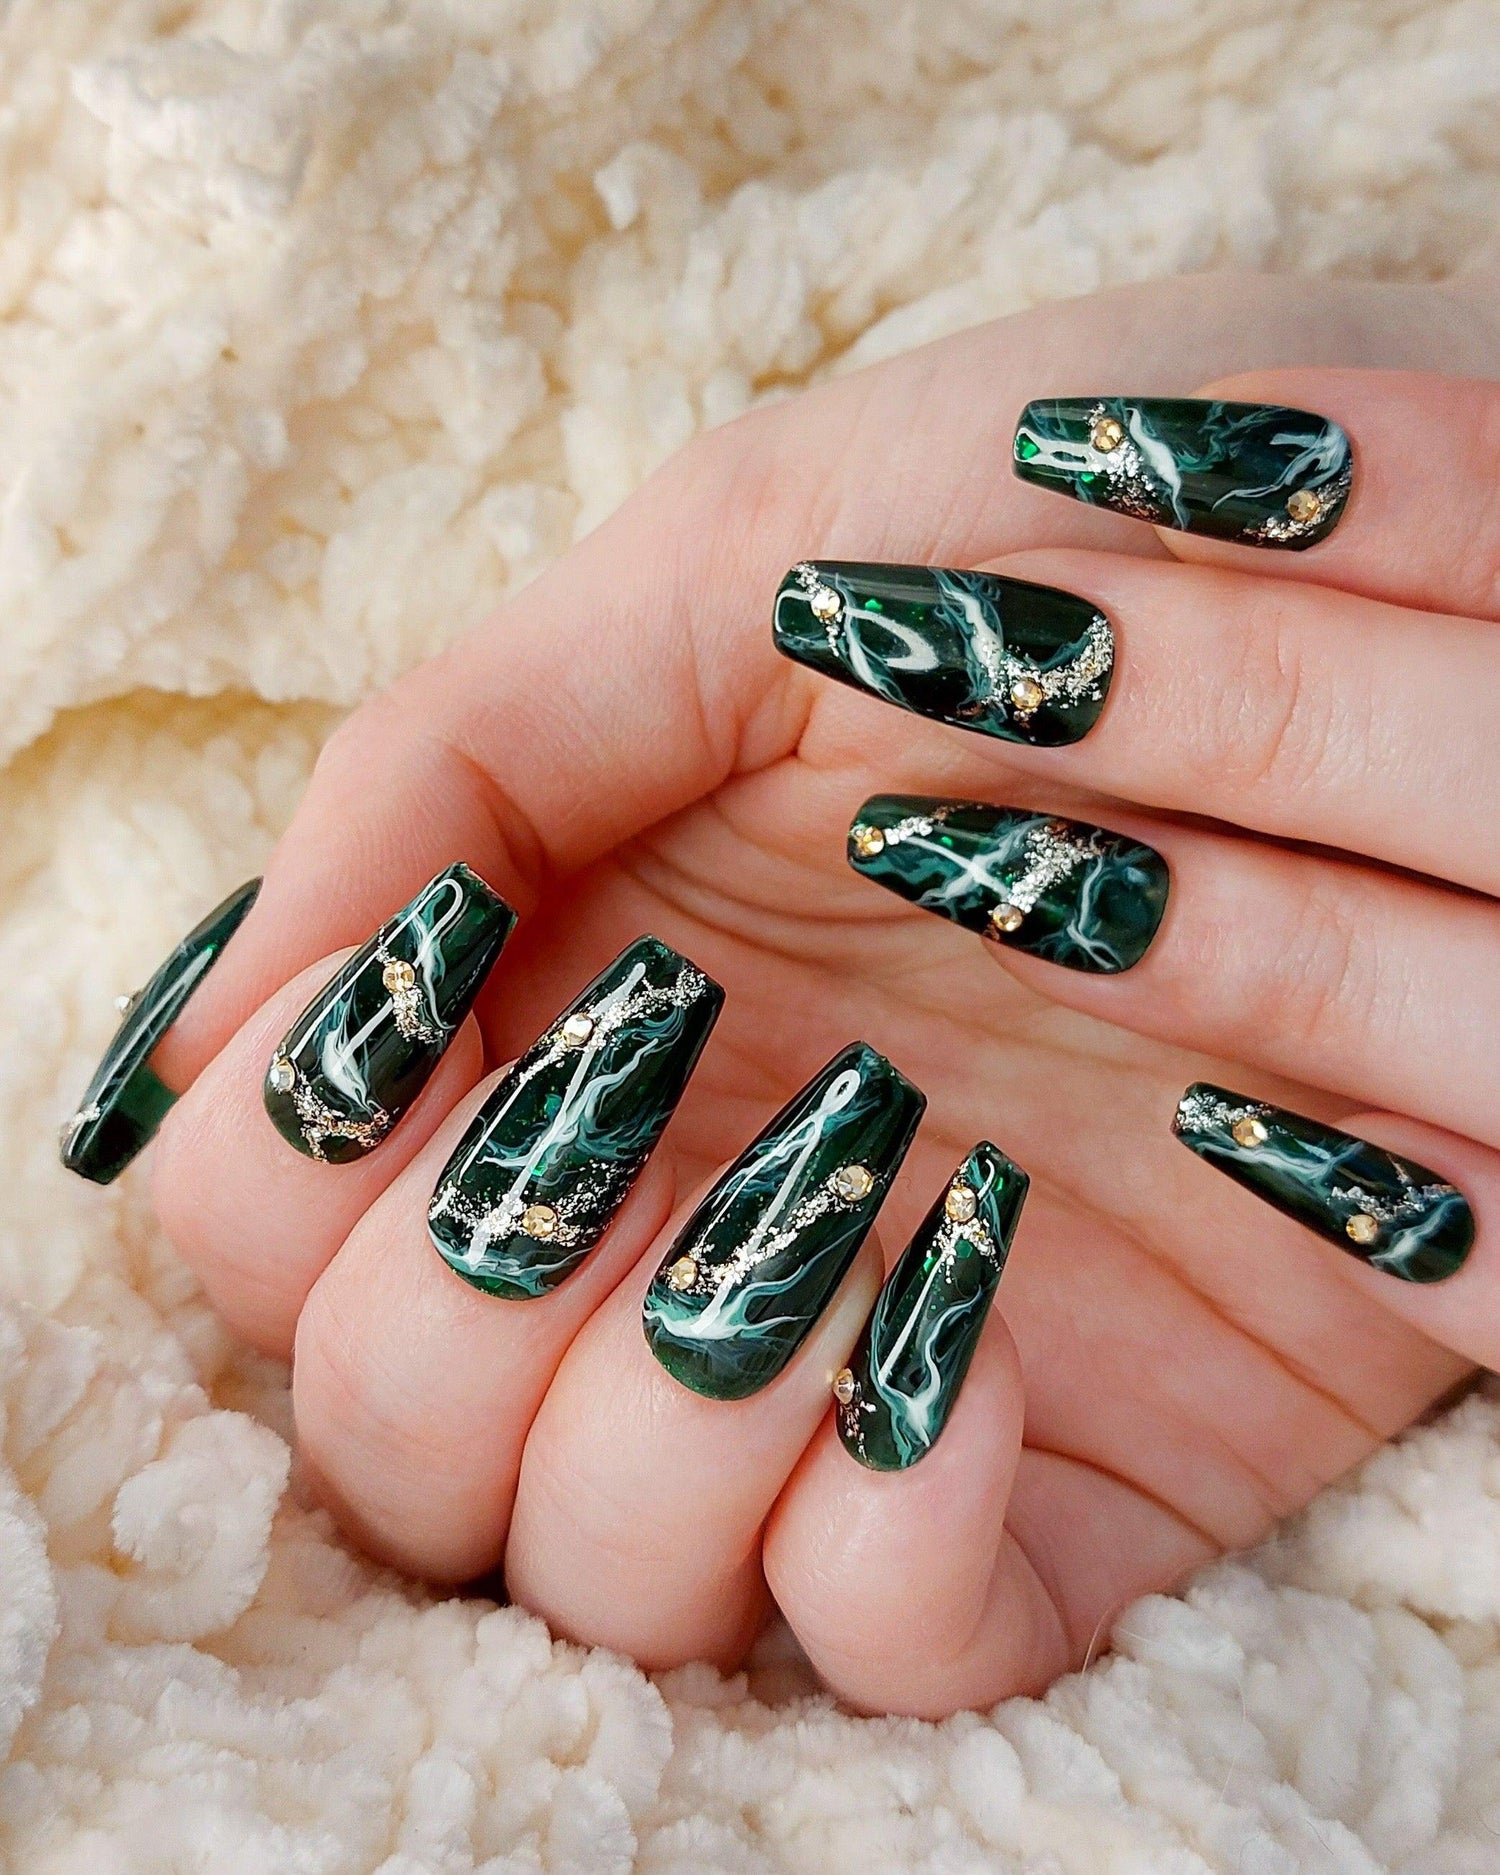 Green emerald marble nails custom emerald nails from fancyb press on nails